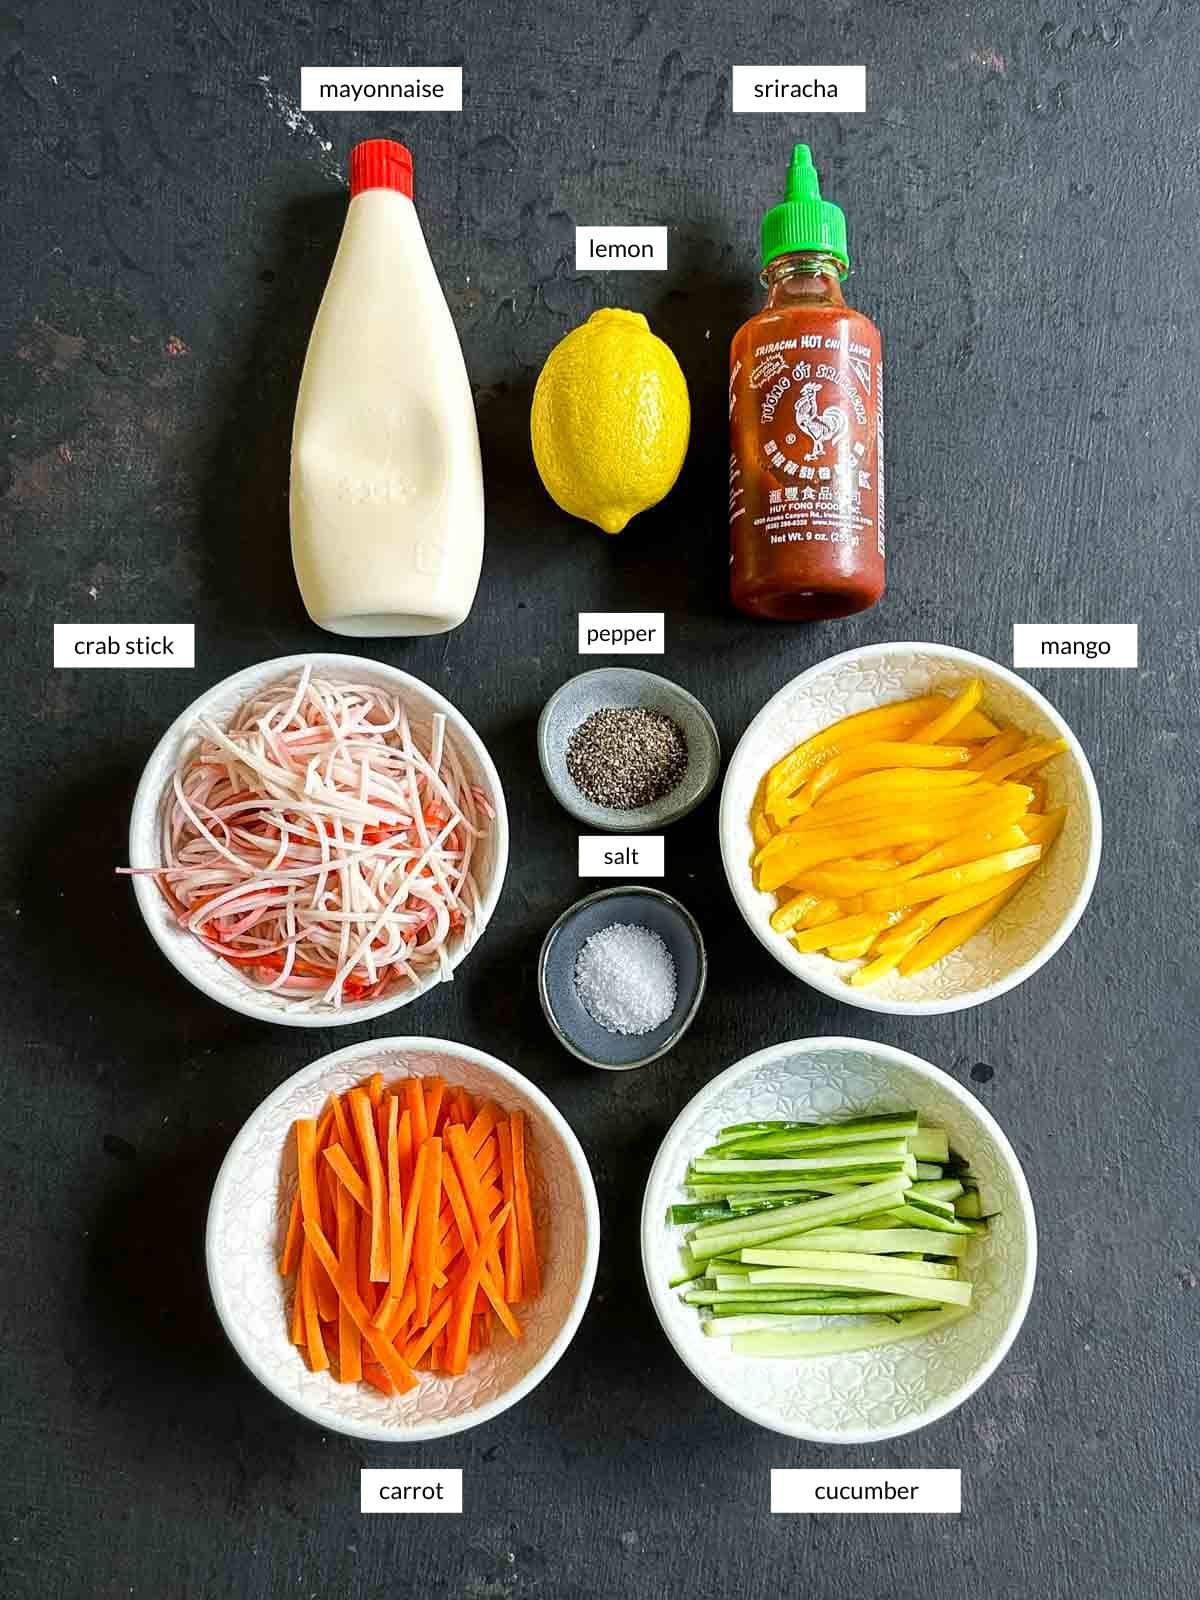 Individually labelled ingredients for kani salad